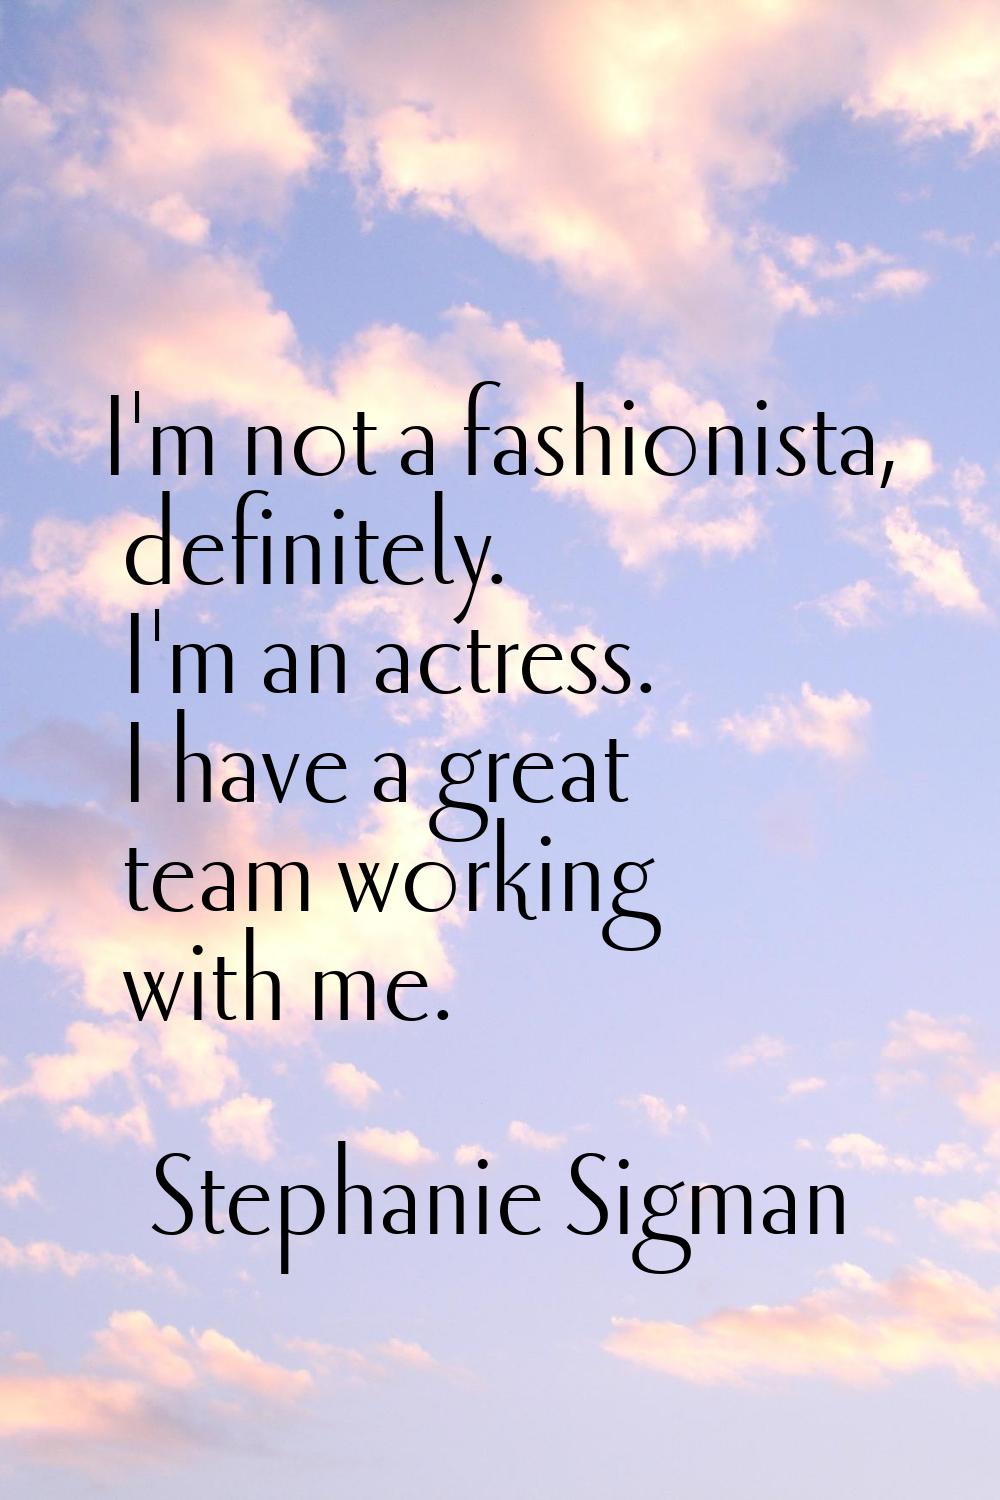 I'm not a fashionista, definitely. I'm an actress. I have a great team working with me.